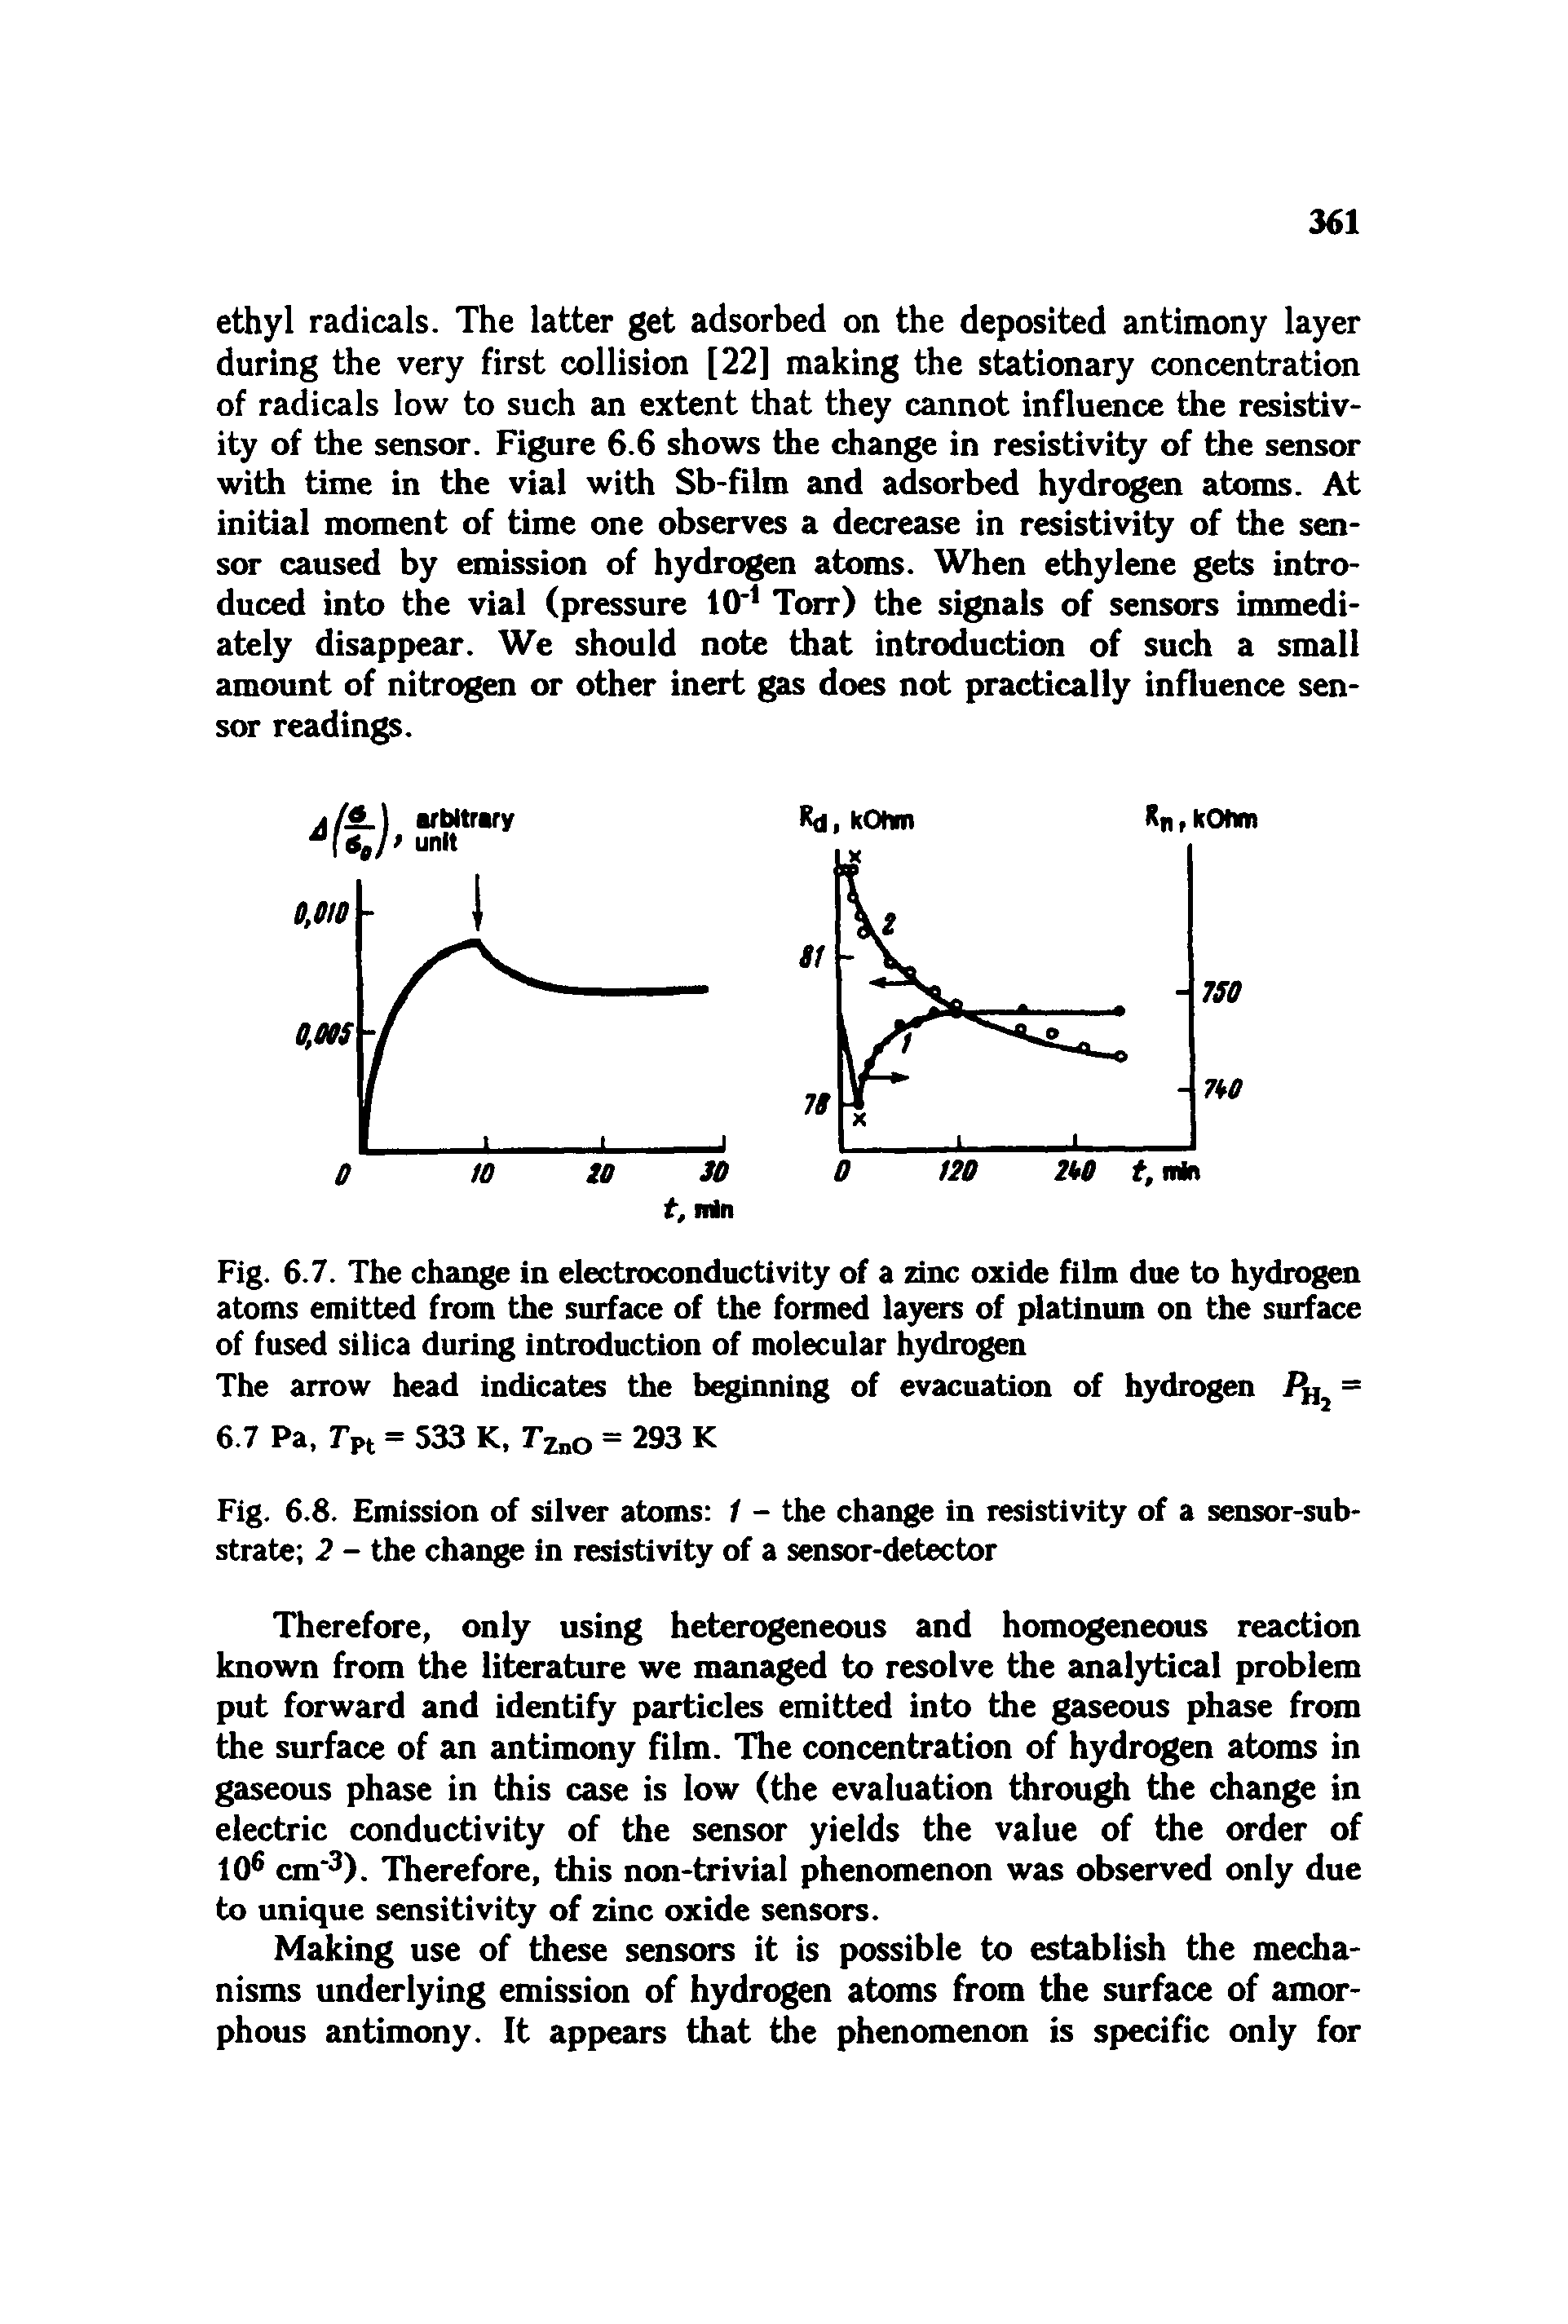 Fig. 6.8. Emission of silver atoms 1 - the change in resistivity of a sensor-substrate 2 - the change in resistivity of a sensor-detector...